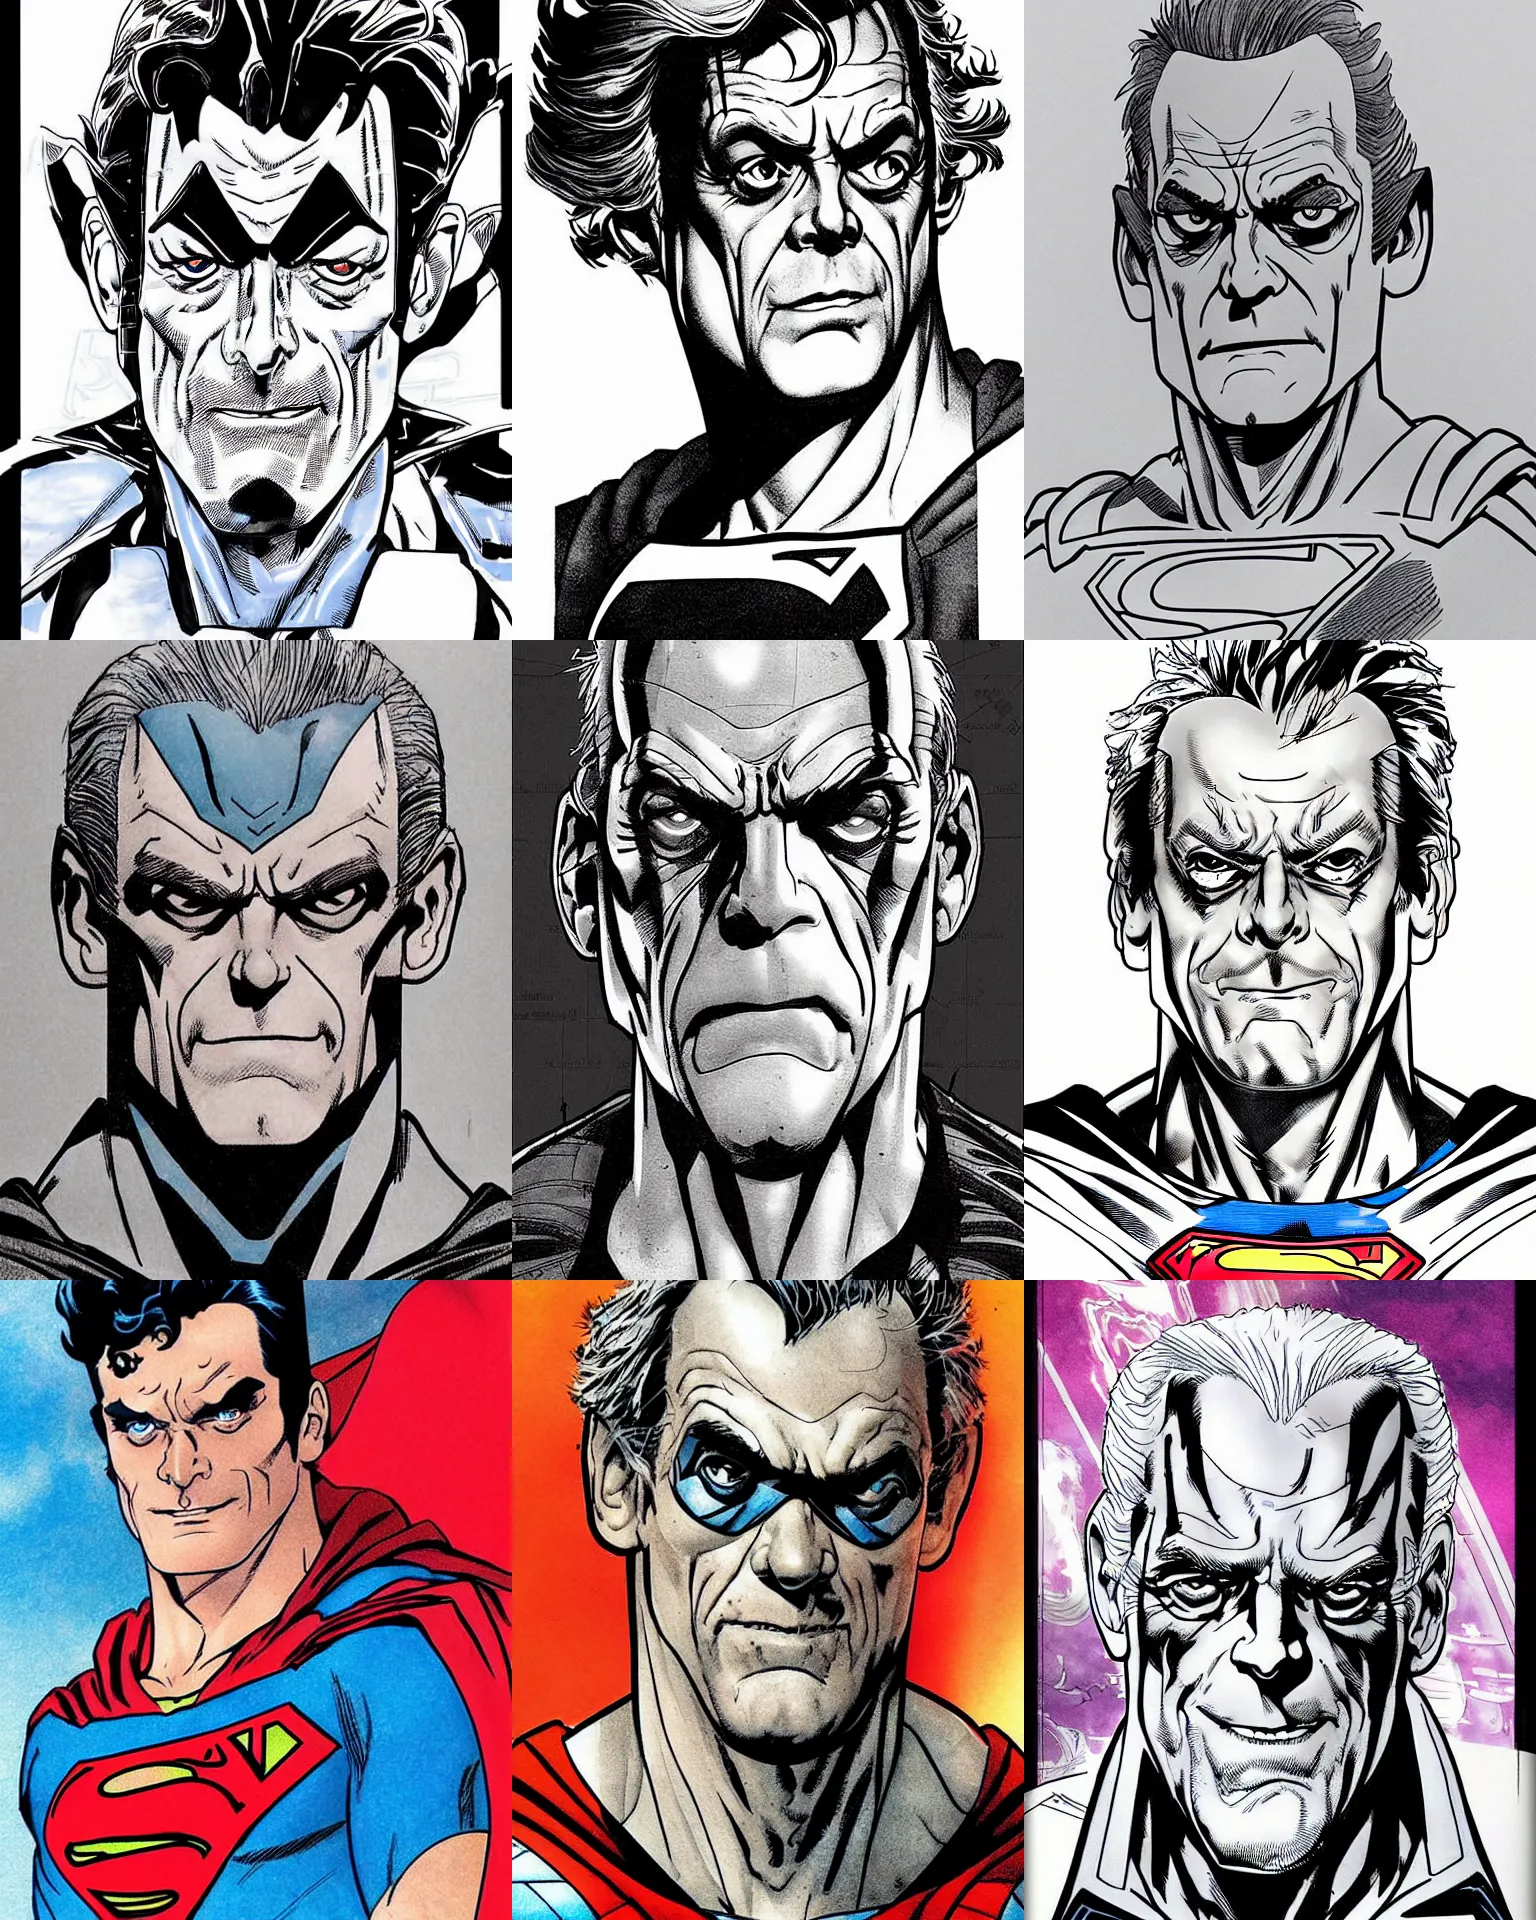 Prompt: christopher lloyd!!! jim lee!!! flat ink sketch by jim lee face close up headshot superman costume in the style of jim lee, x - men superhero comic book character by jim lee